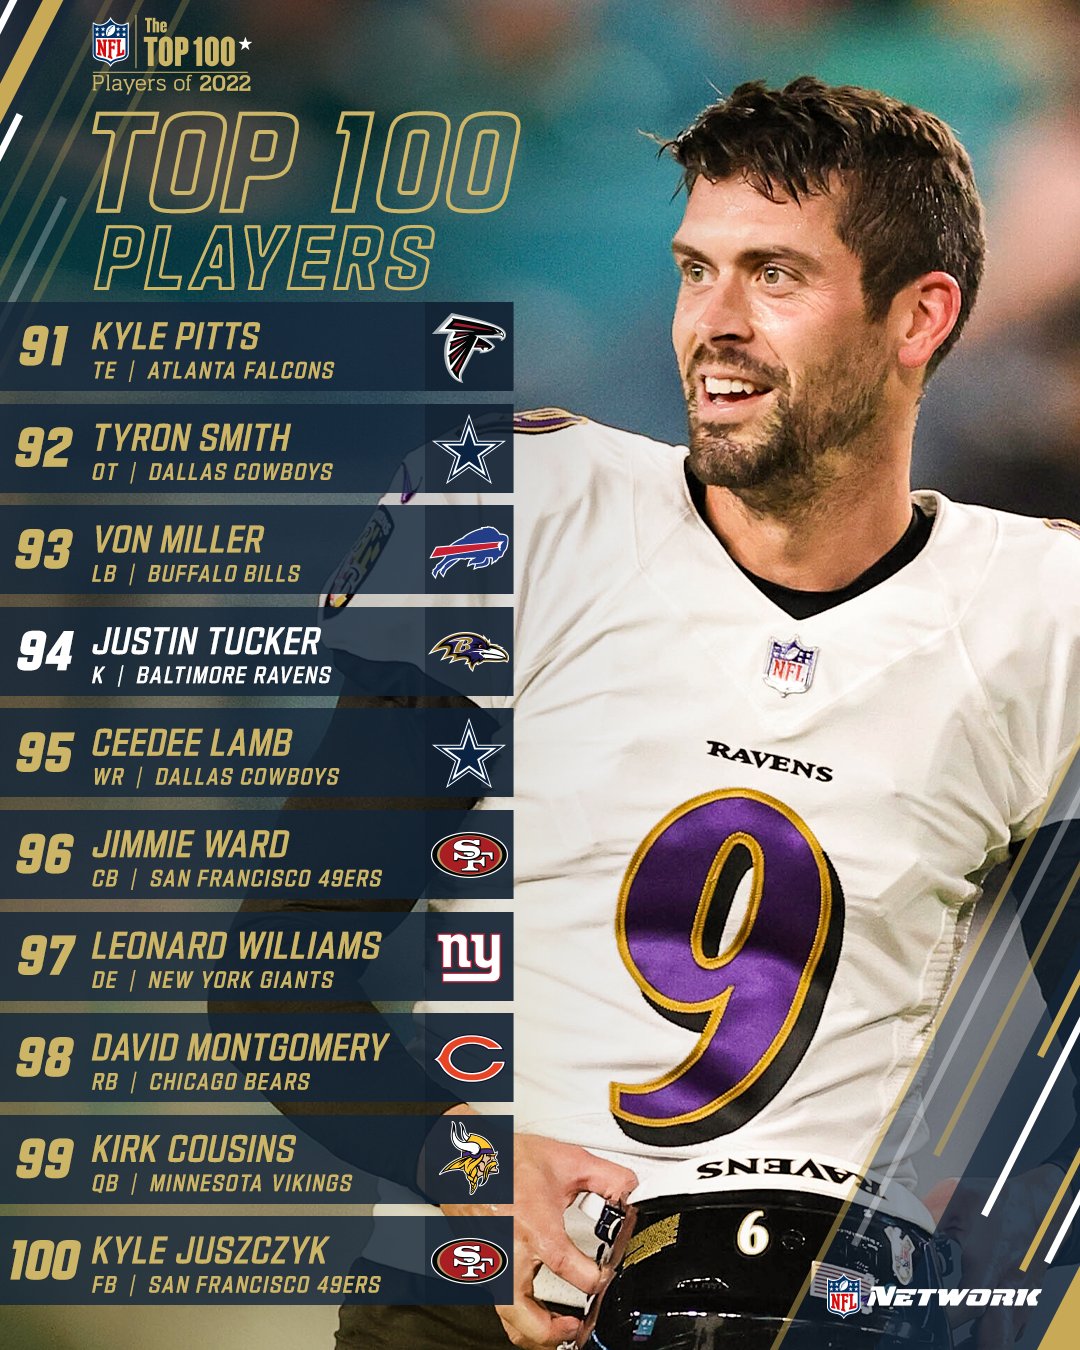 NFL on Twitter "10091 on the NFLTop100 Players of 2022 list! 📺 